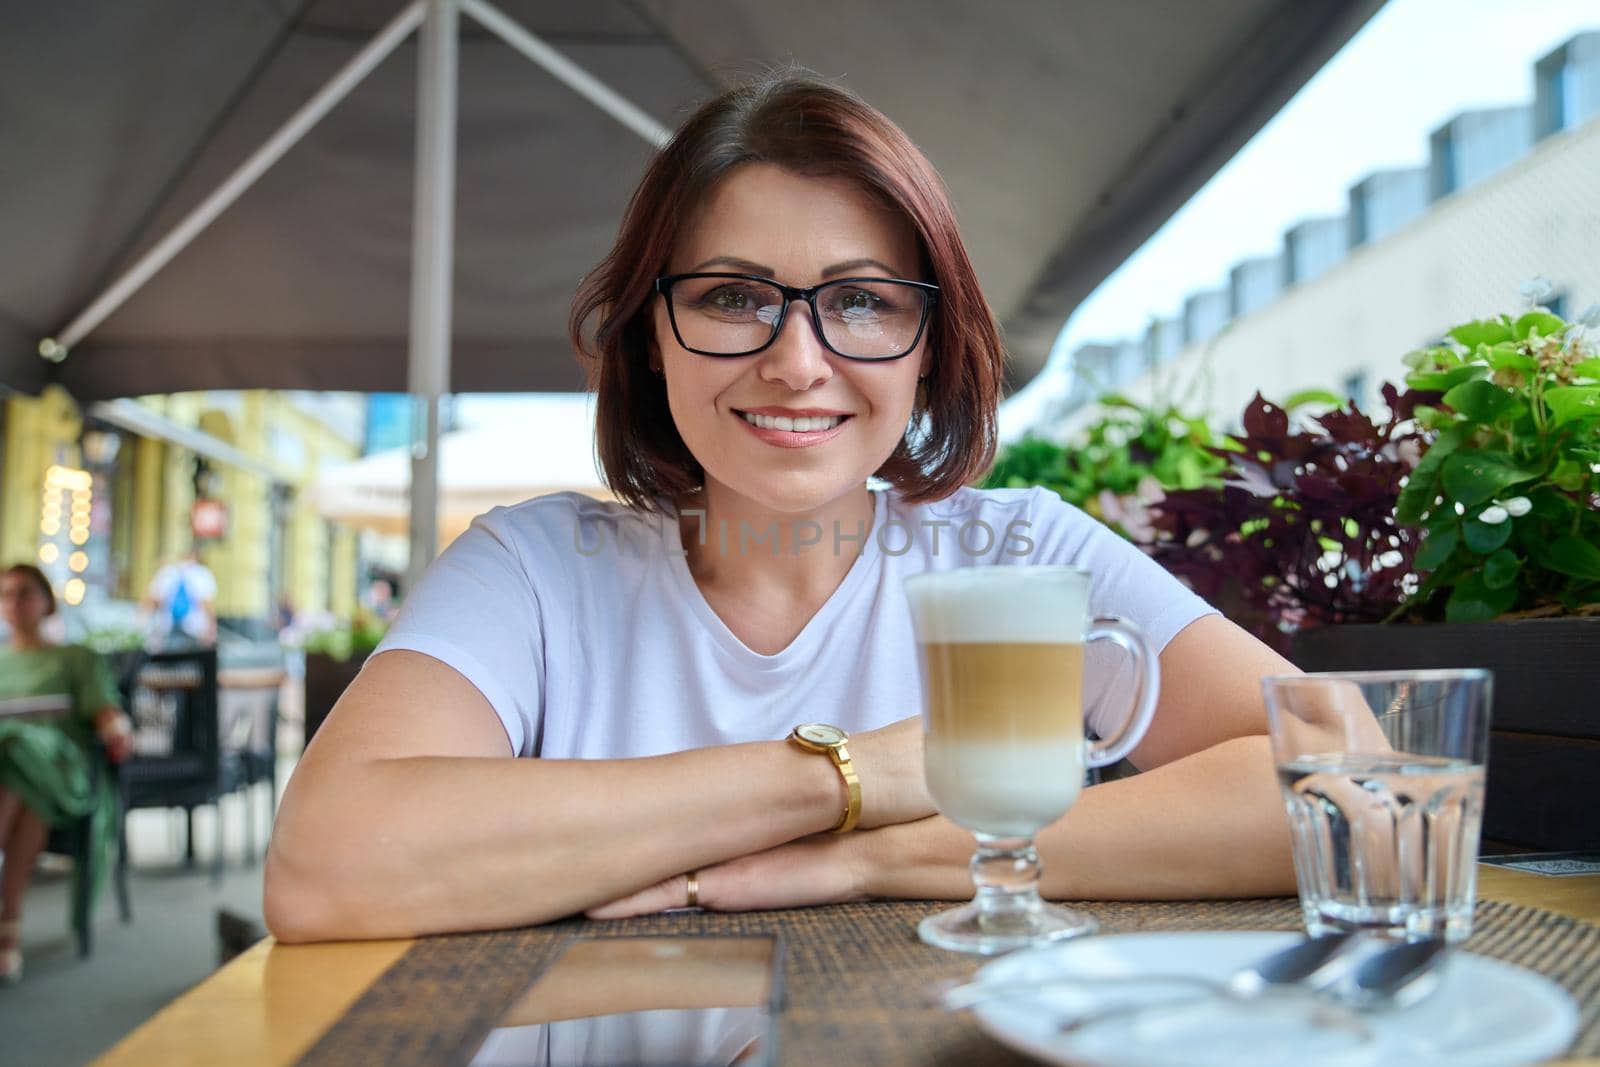 Portrait of smiling middle aged woman looking at camera, 40s female wearing glasses sitting in an outdoor cafe with cup of coffee. Lifestyle, urban style, middle-aged people concept